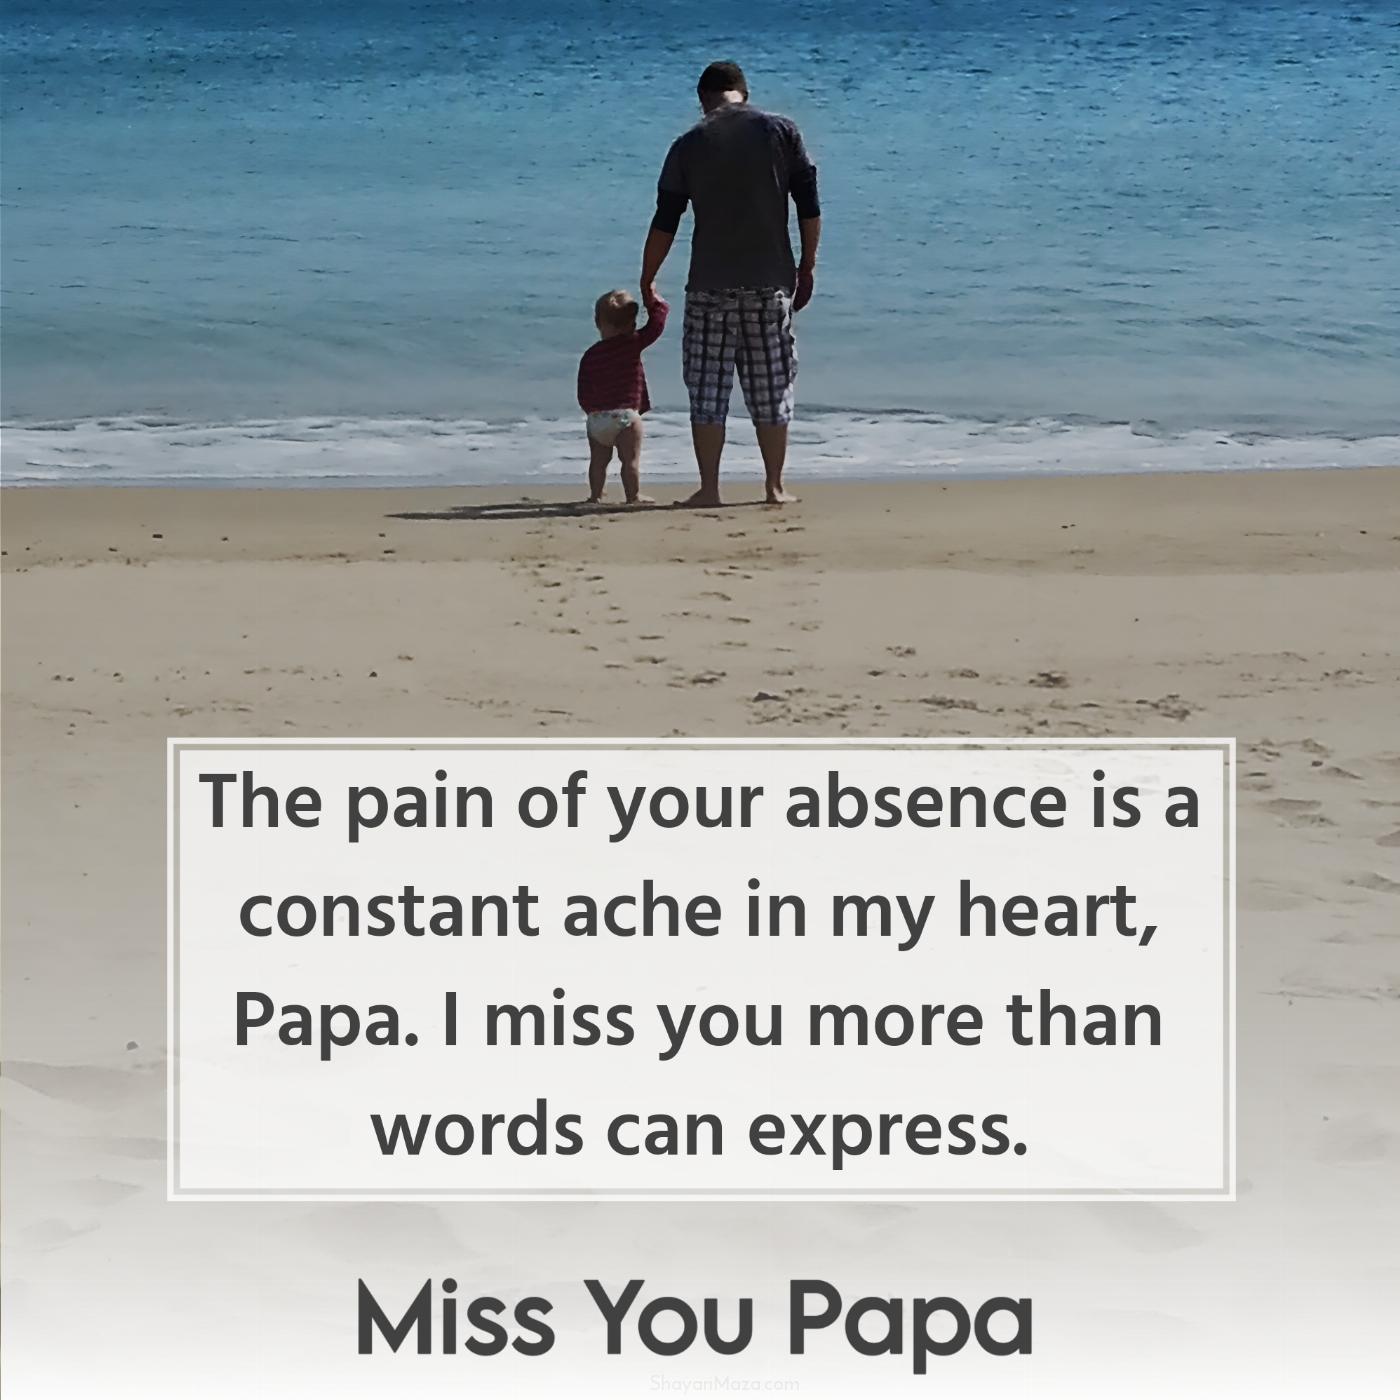 The pain of your absence is a constant ache in my heart Papa